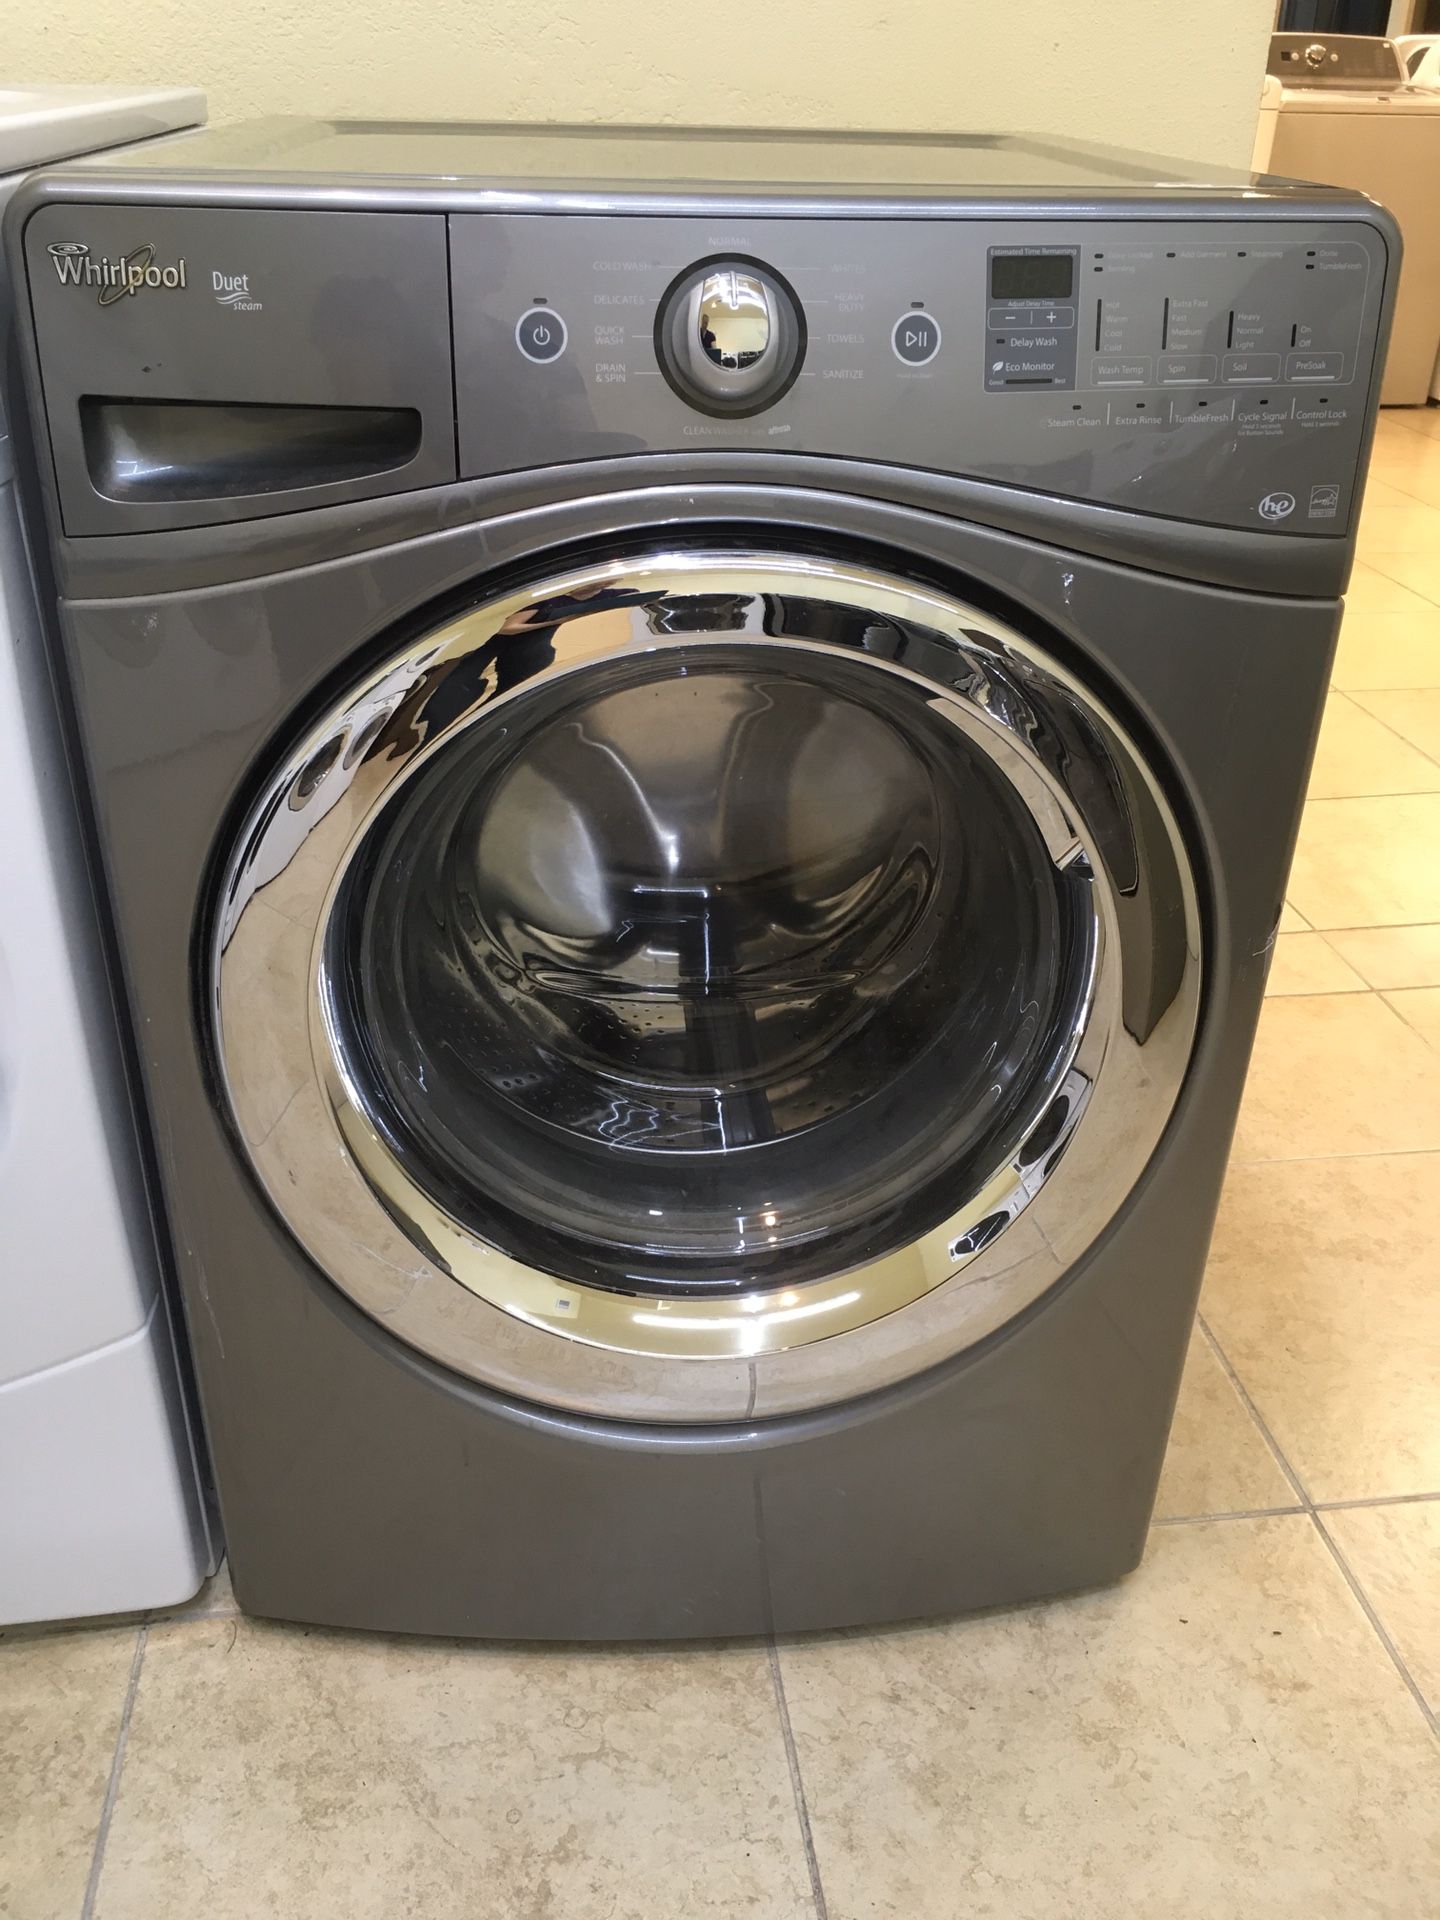 Whirlpool Duet front load washer